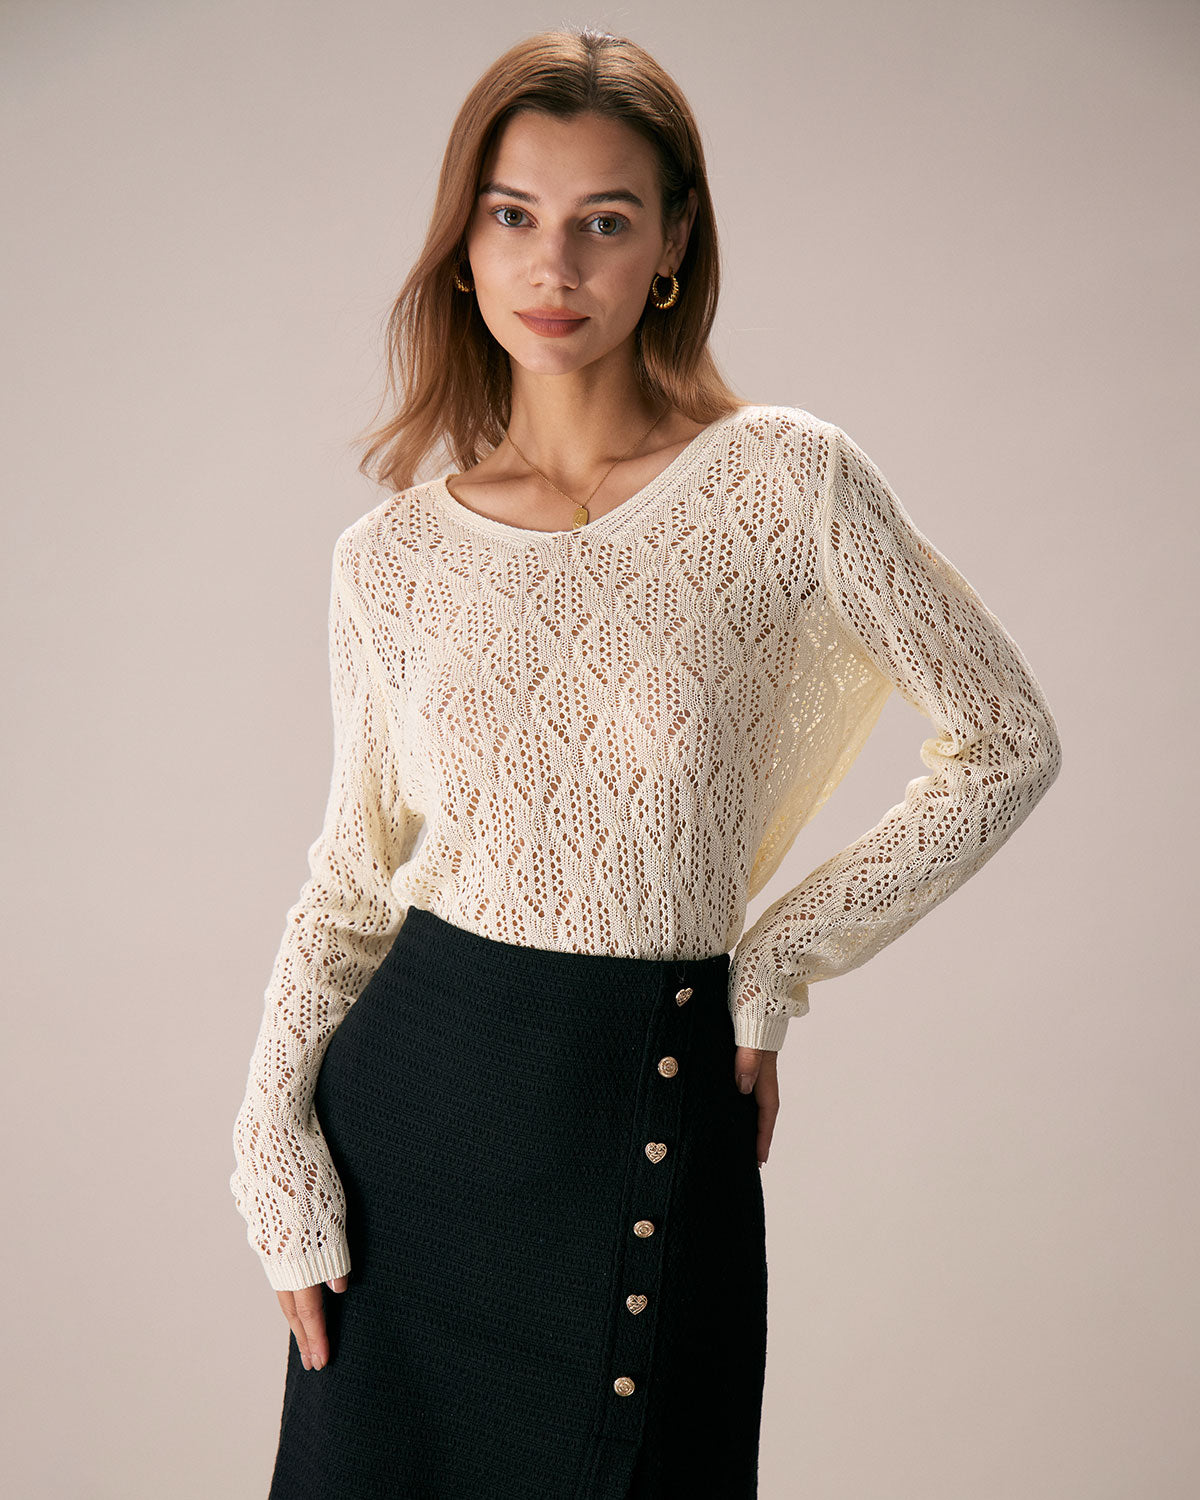 The Apricot V Neck Pointelle Mesh Knit Top